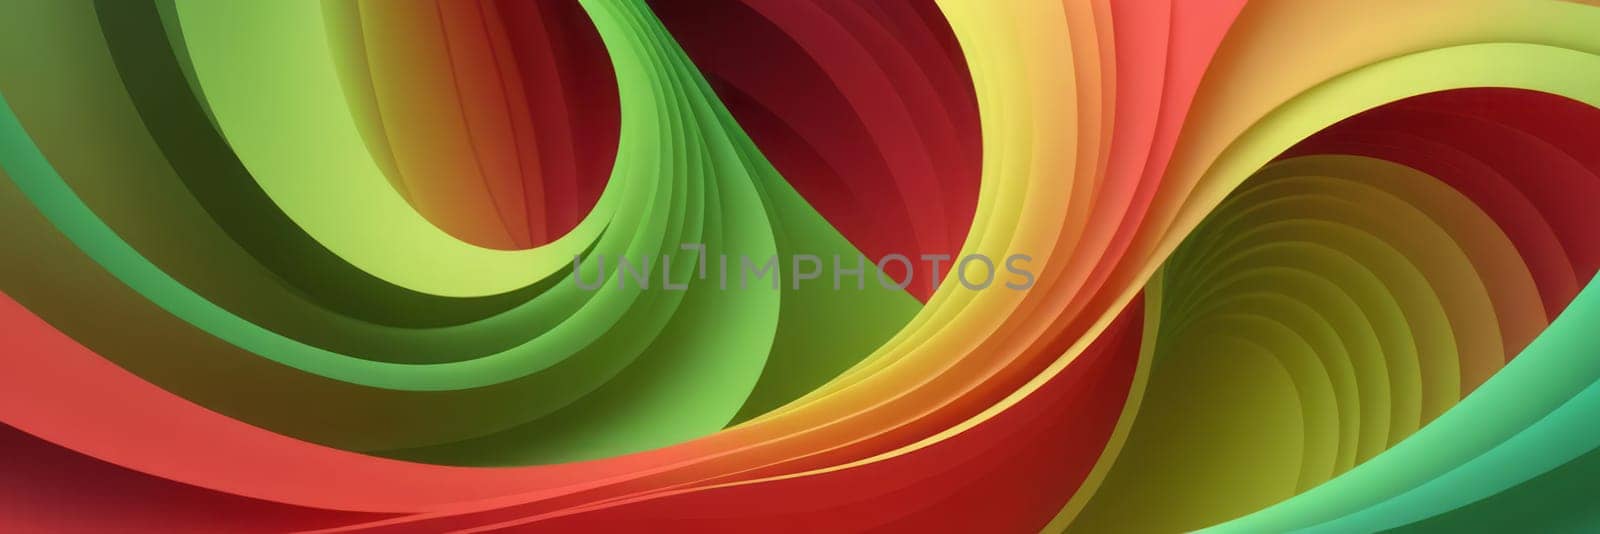 Vortex Shapes in Red and Light green by nkotlyar